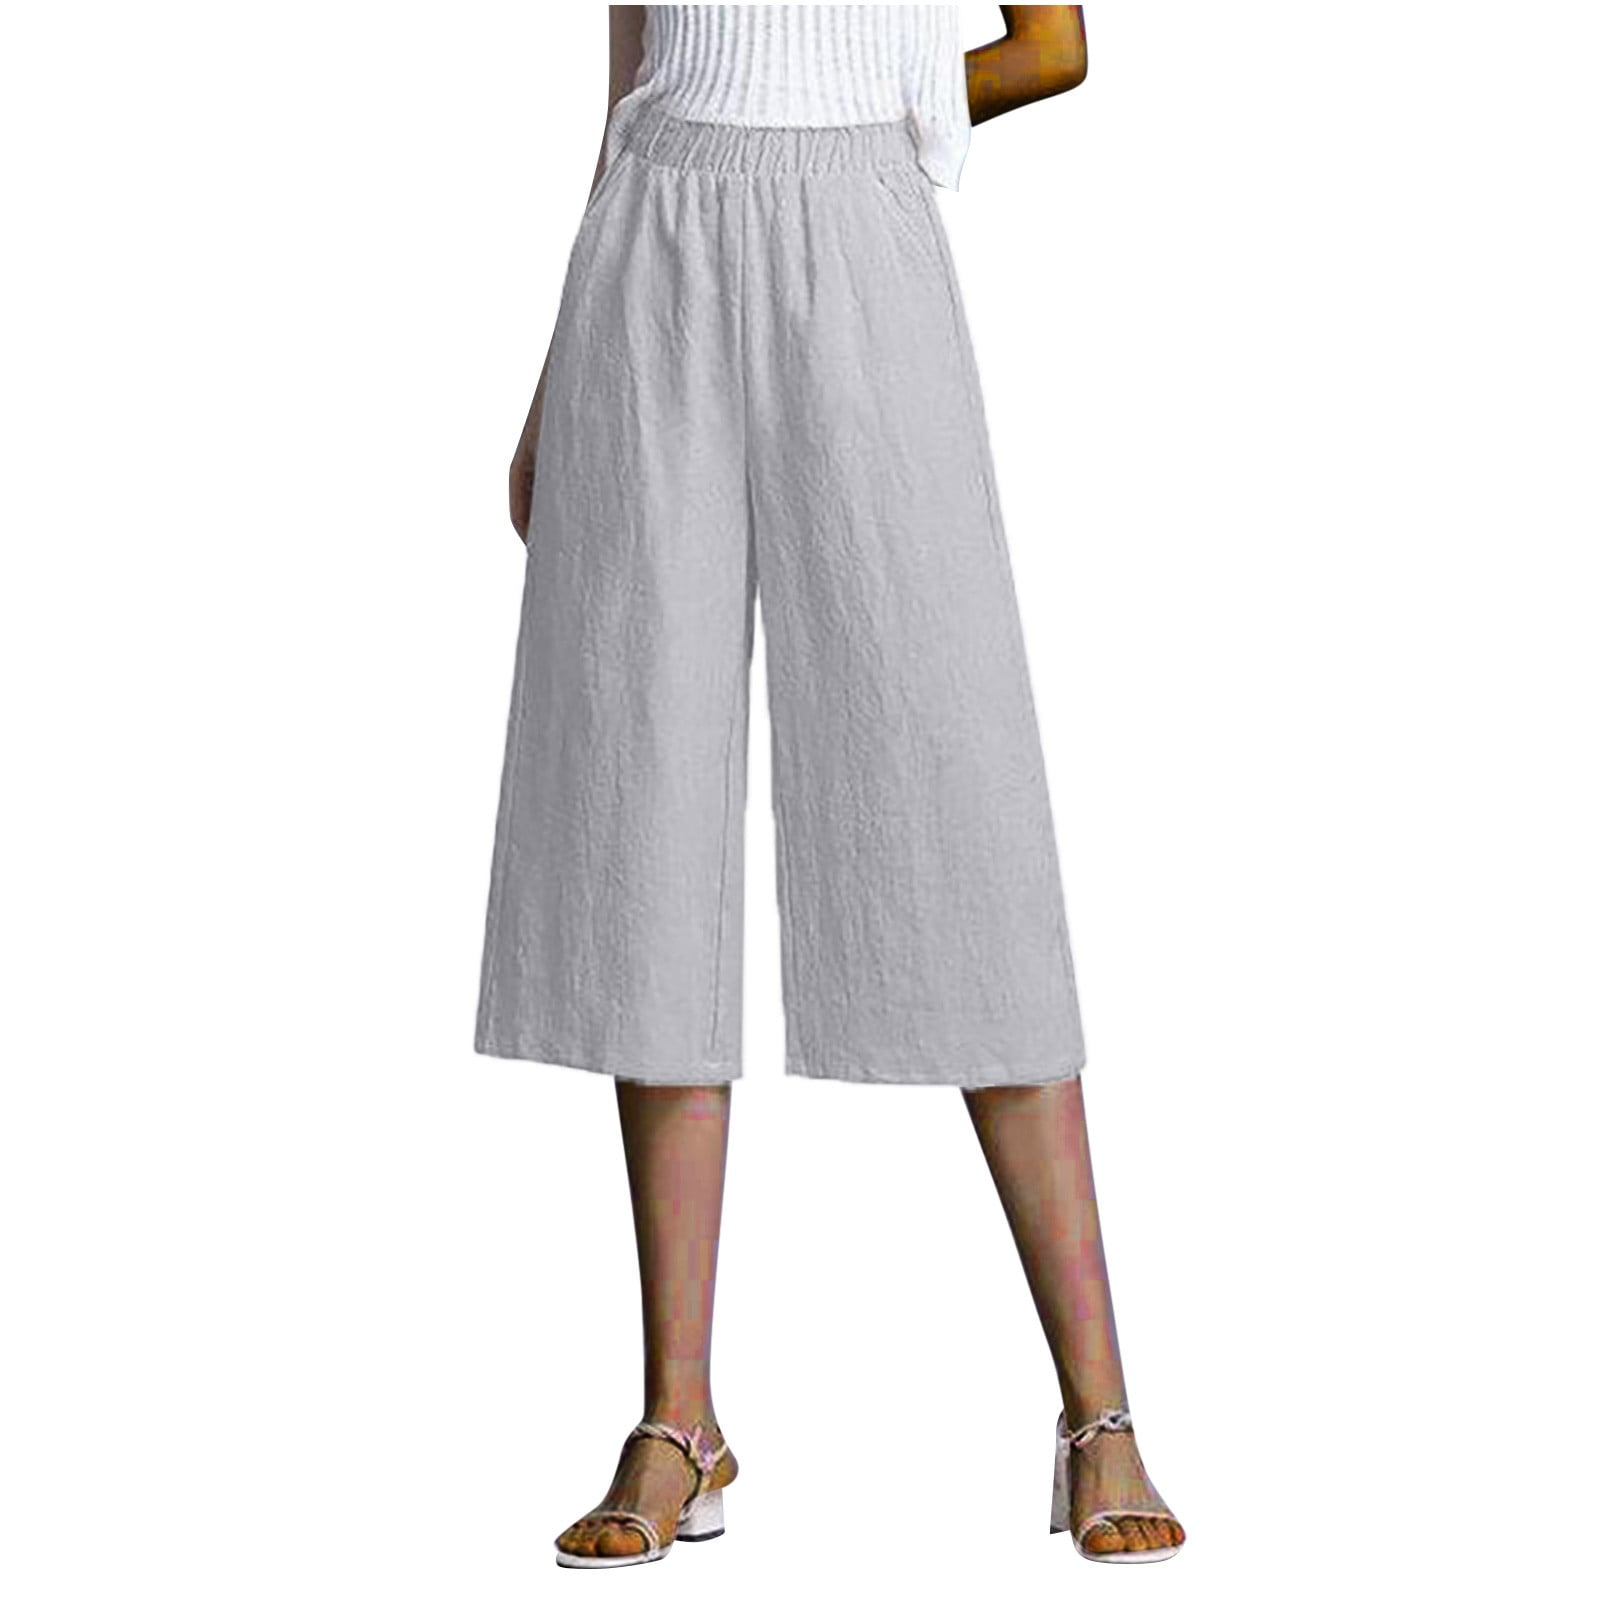 Hesxuno Women's Capri Pants Fashion Solid Straight Wide Leg Pants Elastic  Waist Cropped Trousers Ladies Casual Capris With Pocket 